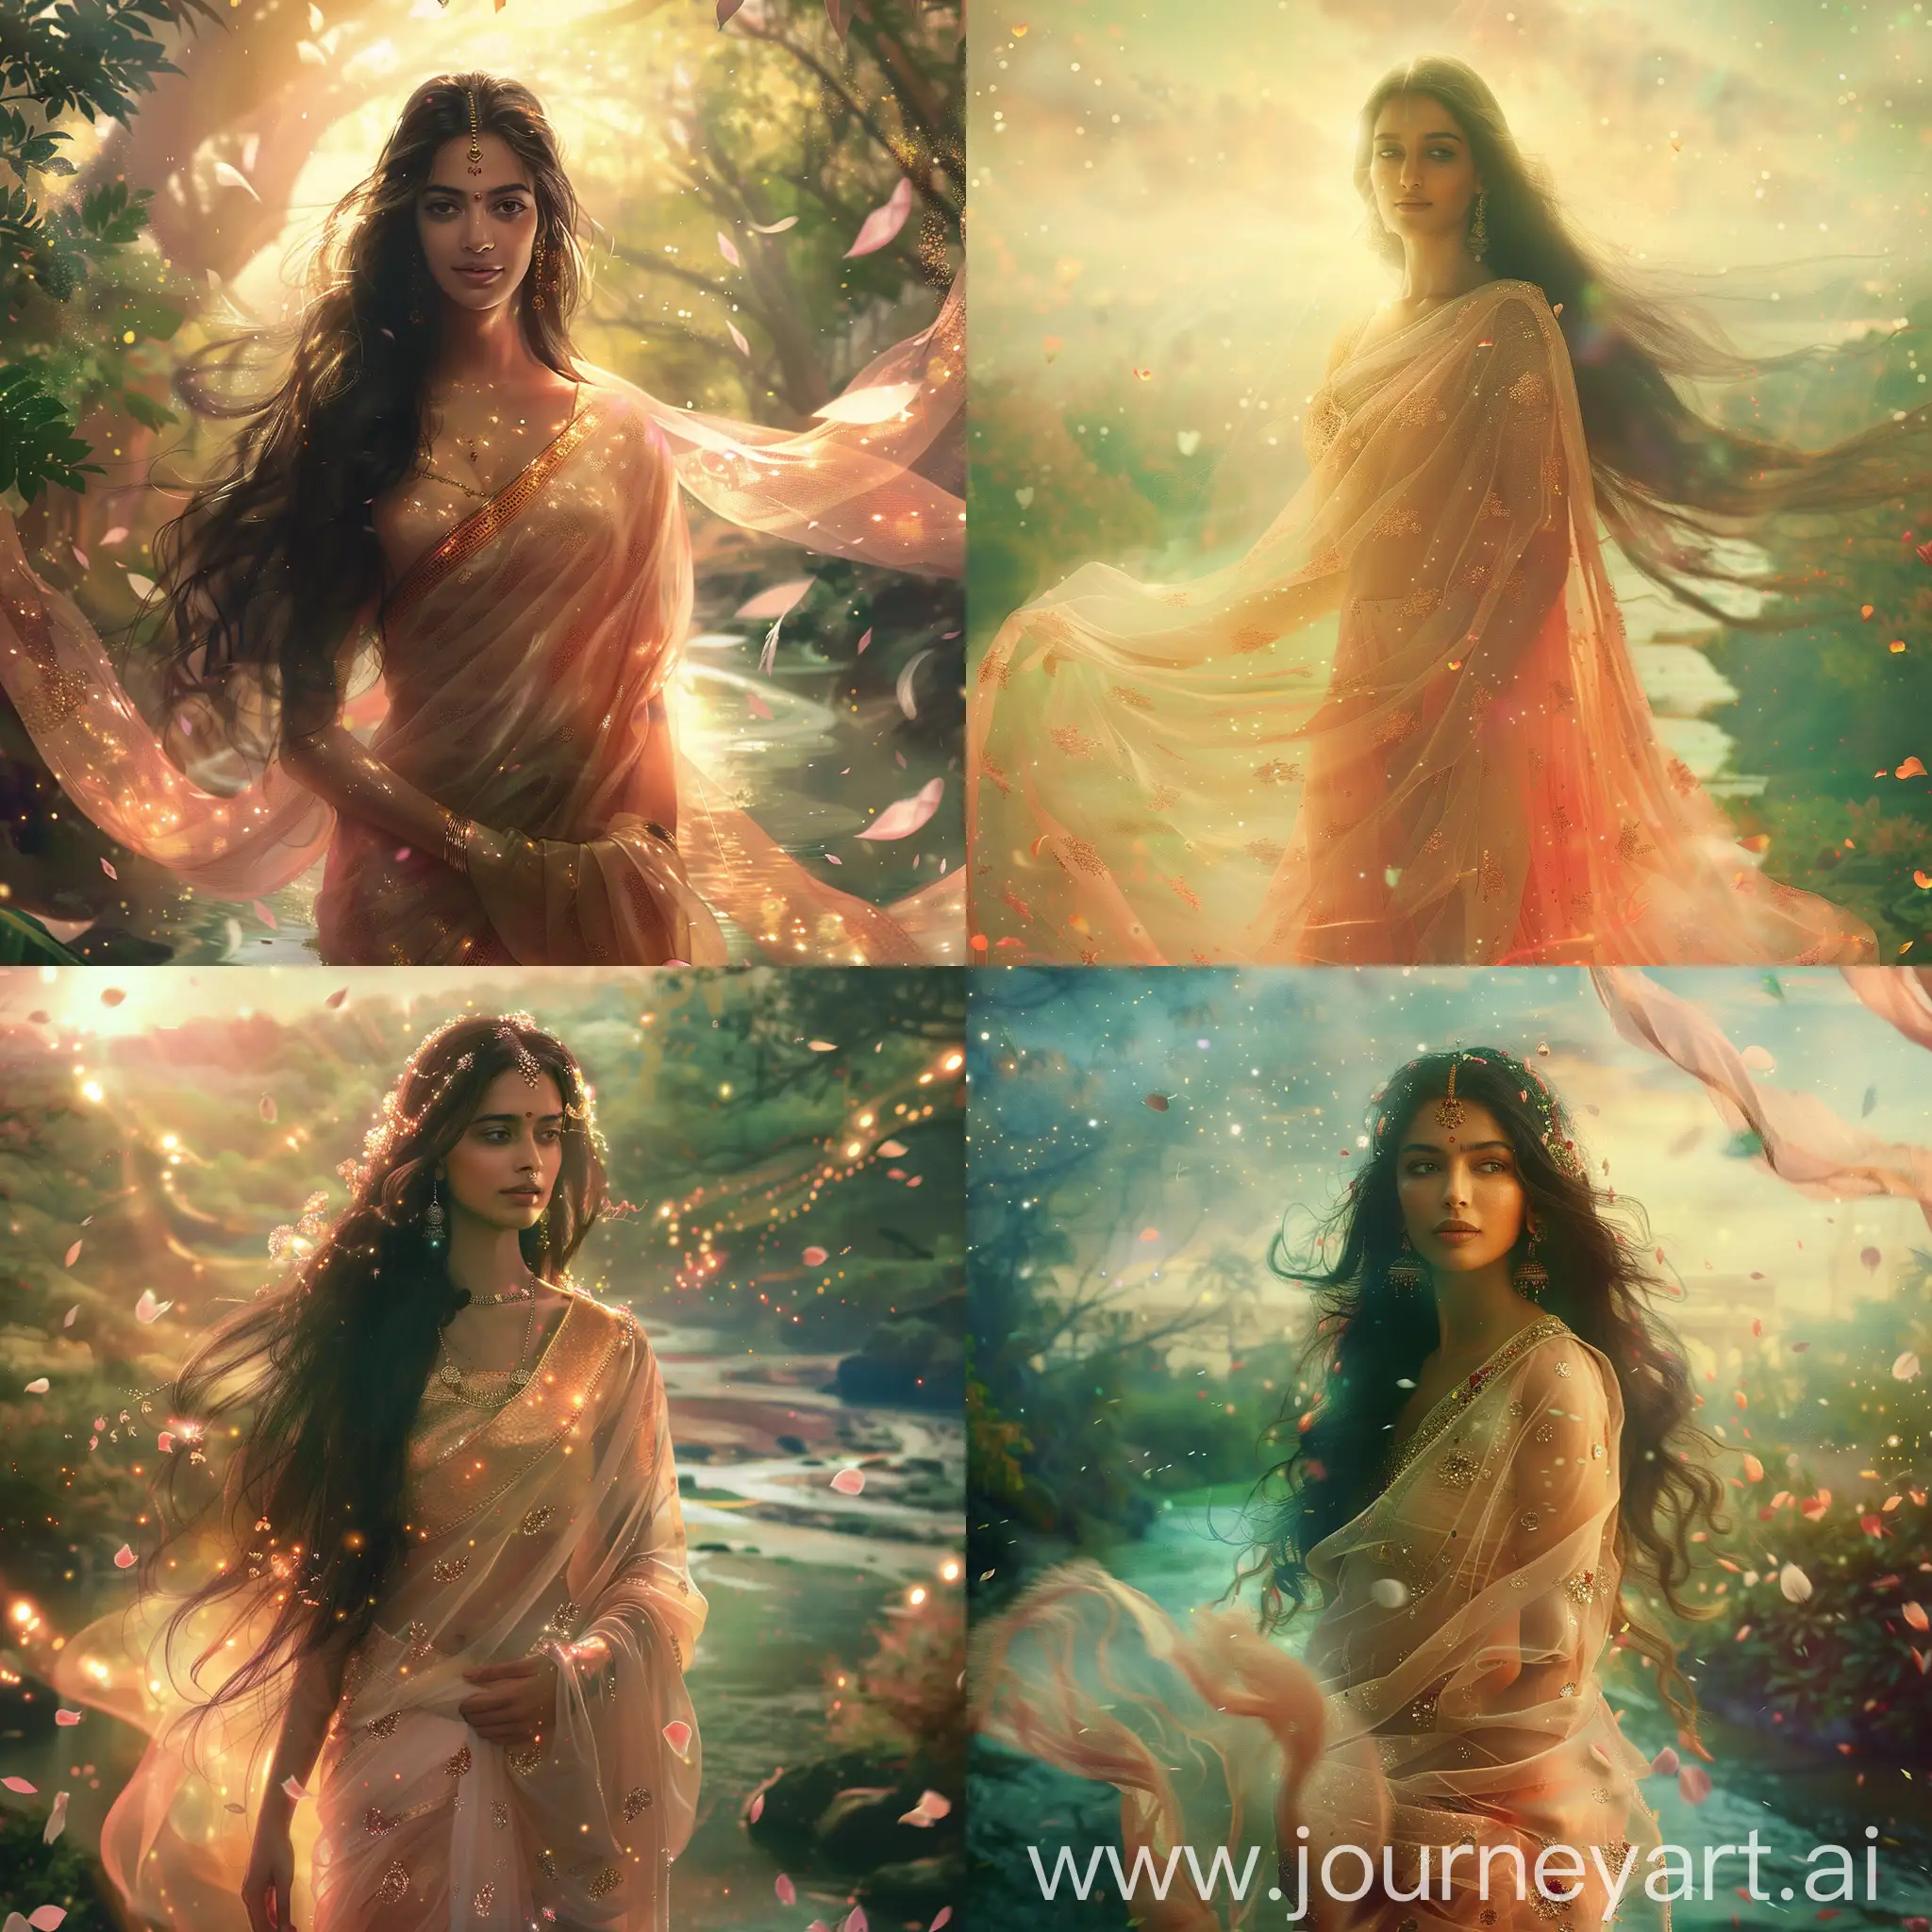 "Imagine a serene celestial landscape, bathed in a soft, glowing light that seems to emanate from the surroundings. In the center stands Urvashi, a Hindu mythological nymph known for her breathtaking beauty. She has long, flowing dark hair adorned with shimmering celestial flowers, and her attire is a radiant, traditional sari made of light, almost transparent fabrics that shimmer with the colors of dawn—pale pinks, gentle oranges, and subtle golds. Her skin glows with a soft luminescence, highlighting her graceful, dance-like posture. Around her, the air is filled with floating, delicate petals, and in the background, a celestial river meanders through lush, vibrant greenery under a sky of twinkling stars." cinematic, wide aspect ratio